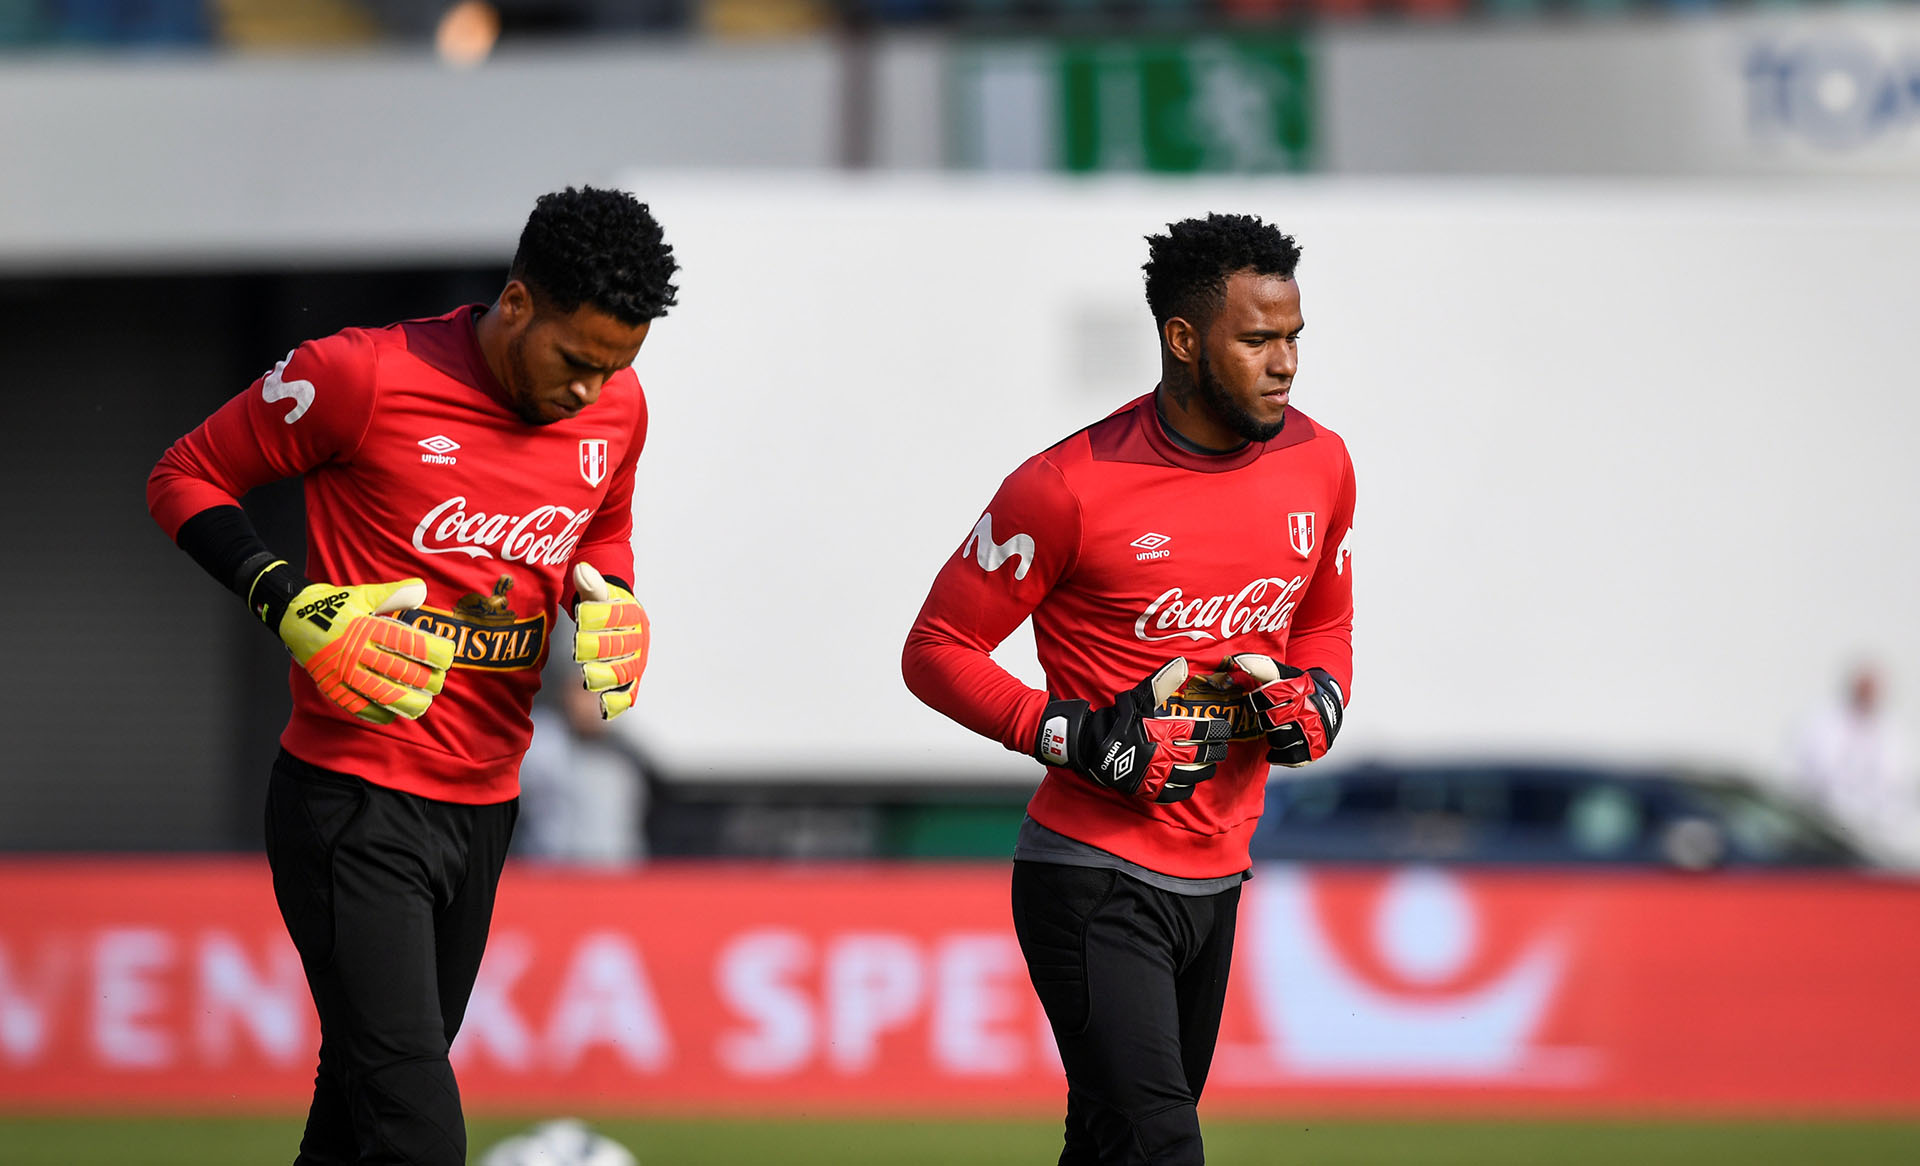 Soccer Football - International Friendly - Sweden v Peru - Ullevi Stadium - Gothenburg, Sweden - June 9, 2018. Peruvian goalkeepers Pedro Gallese and Carlos Caceda enter the pitch prior to the match. TT News Agency/Pontus Lundahl via REUTERS   ATTENTION EDITORS - THIS IMAGE WAS PROVIDED BY A THIRD PARTY. SWEDEN OUT. NO COMMERCIAL OR EDITORIAL SALES IN SWEDEN